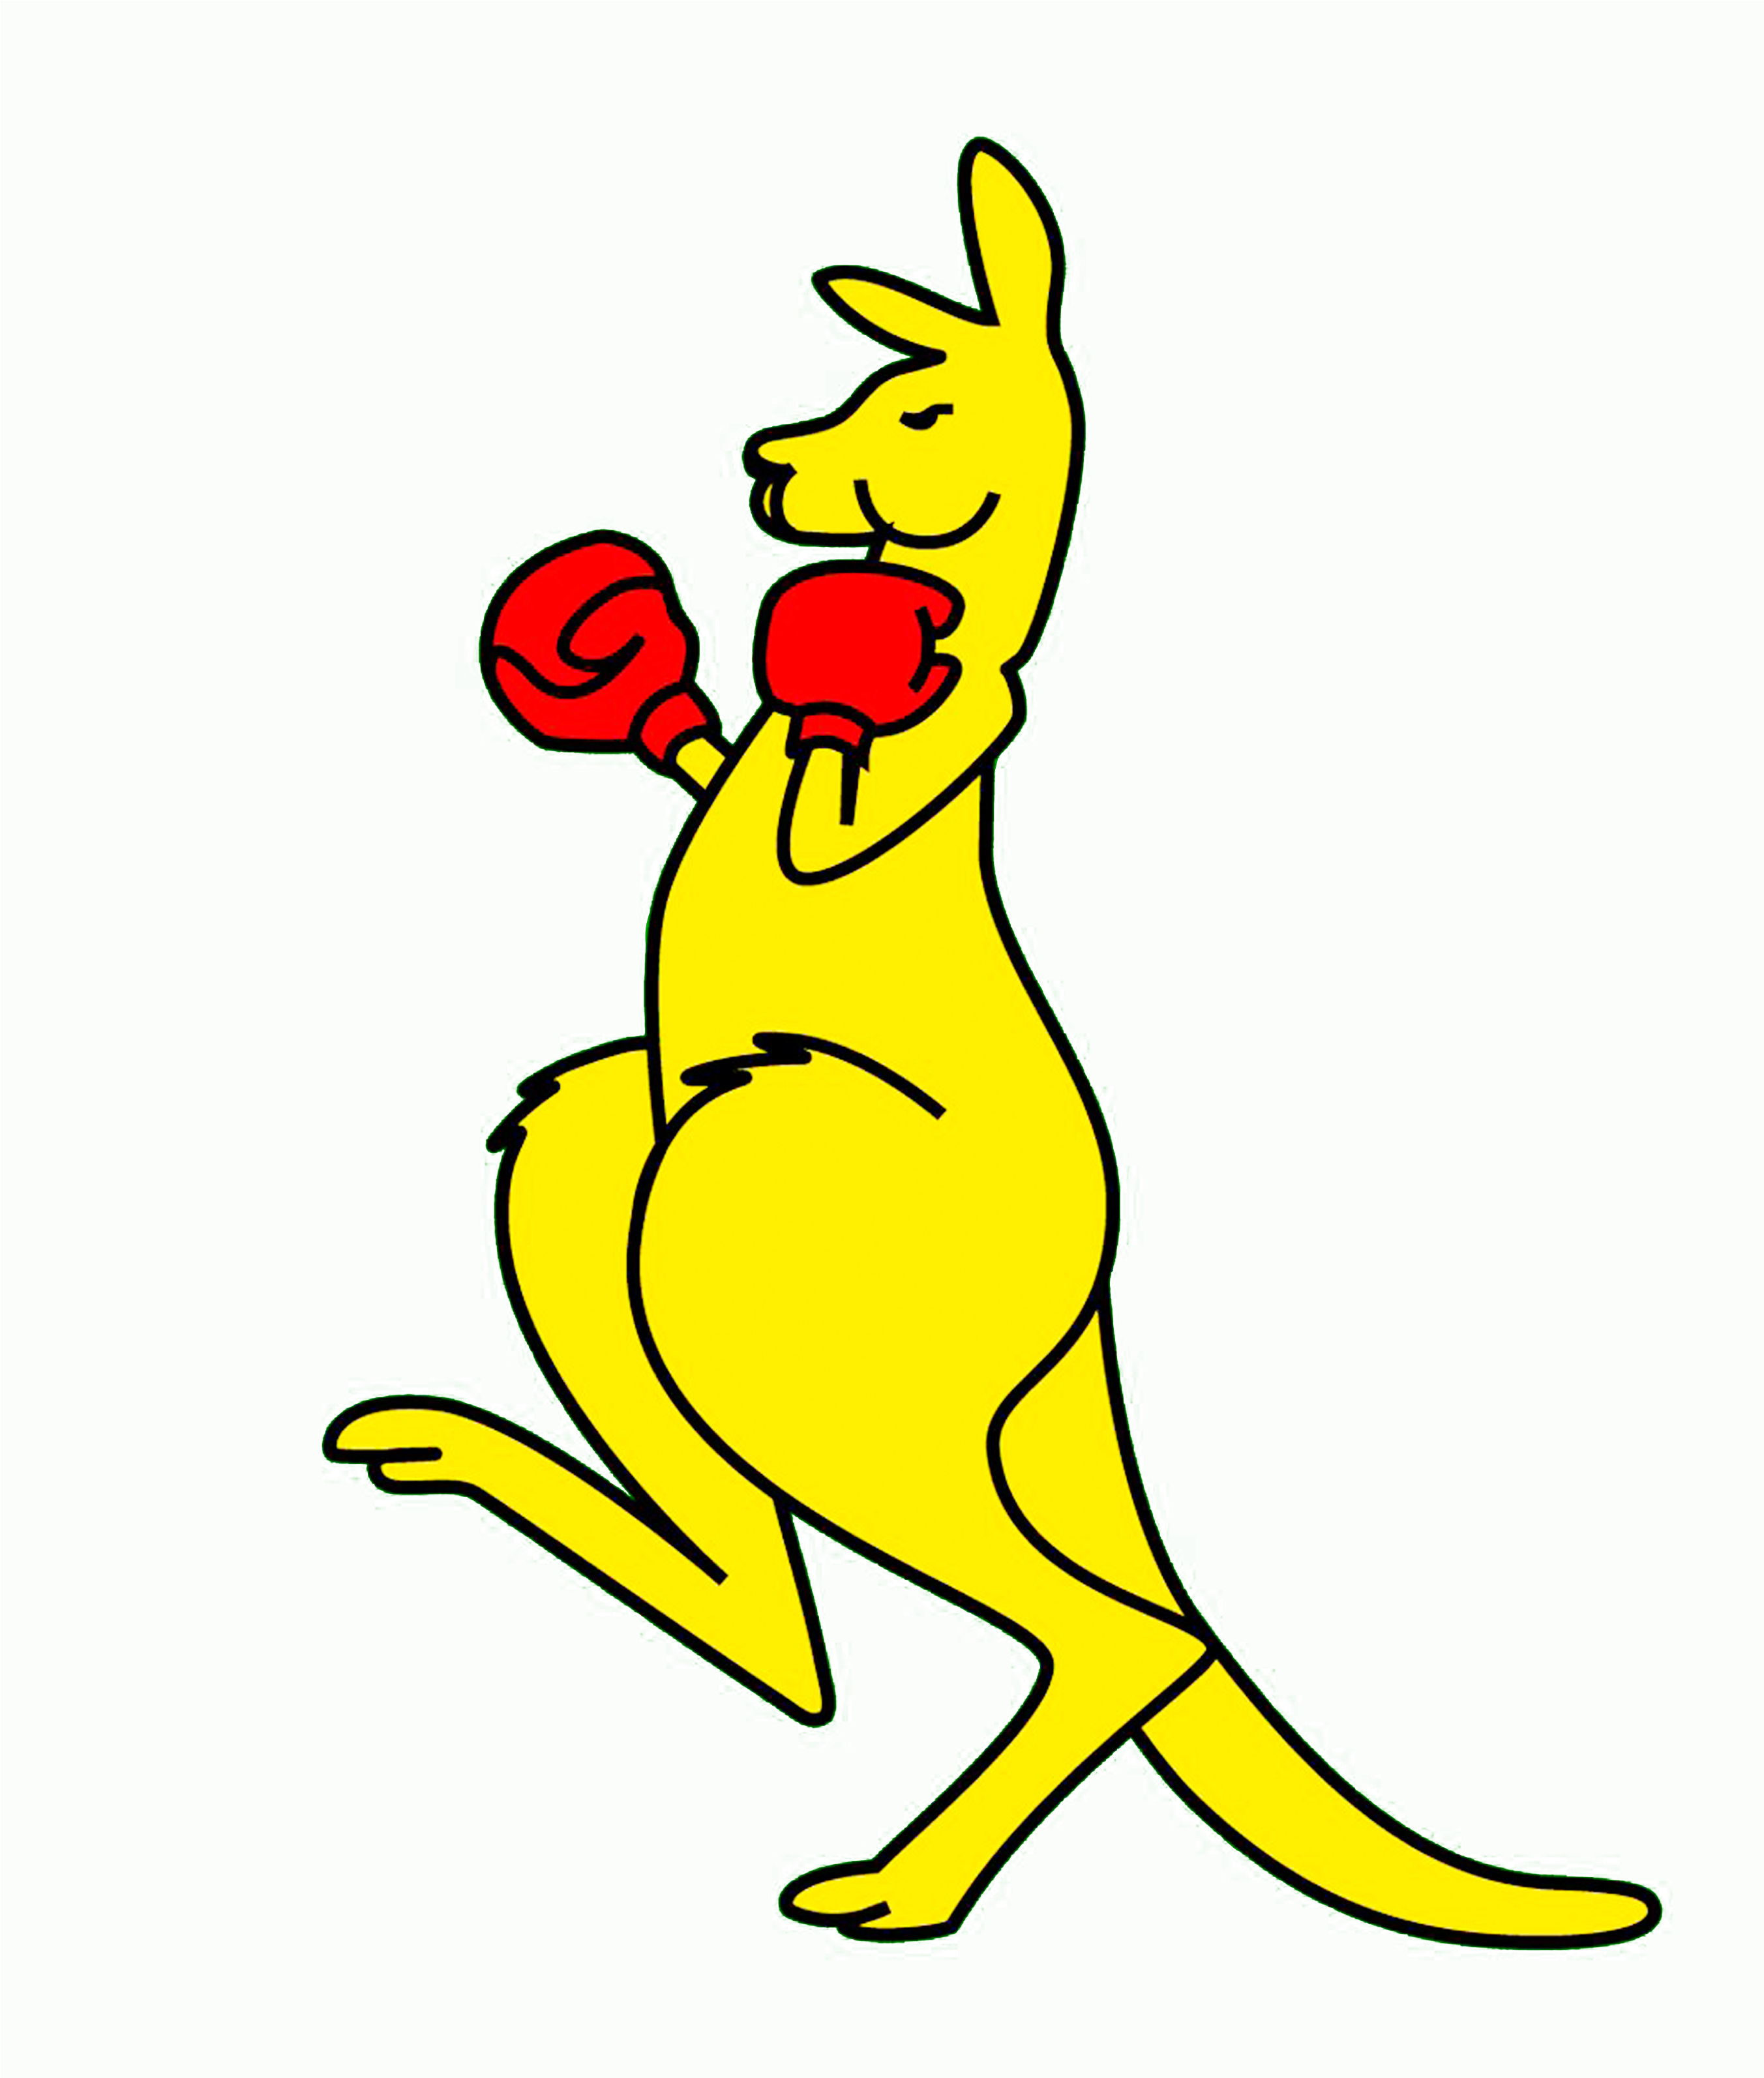 A Yellow Kangaroo With Boxing Gloves